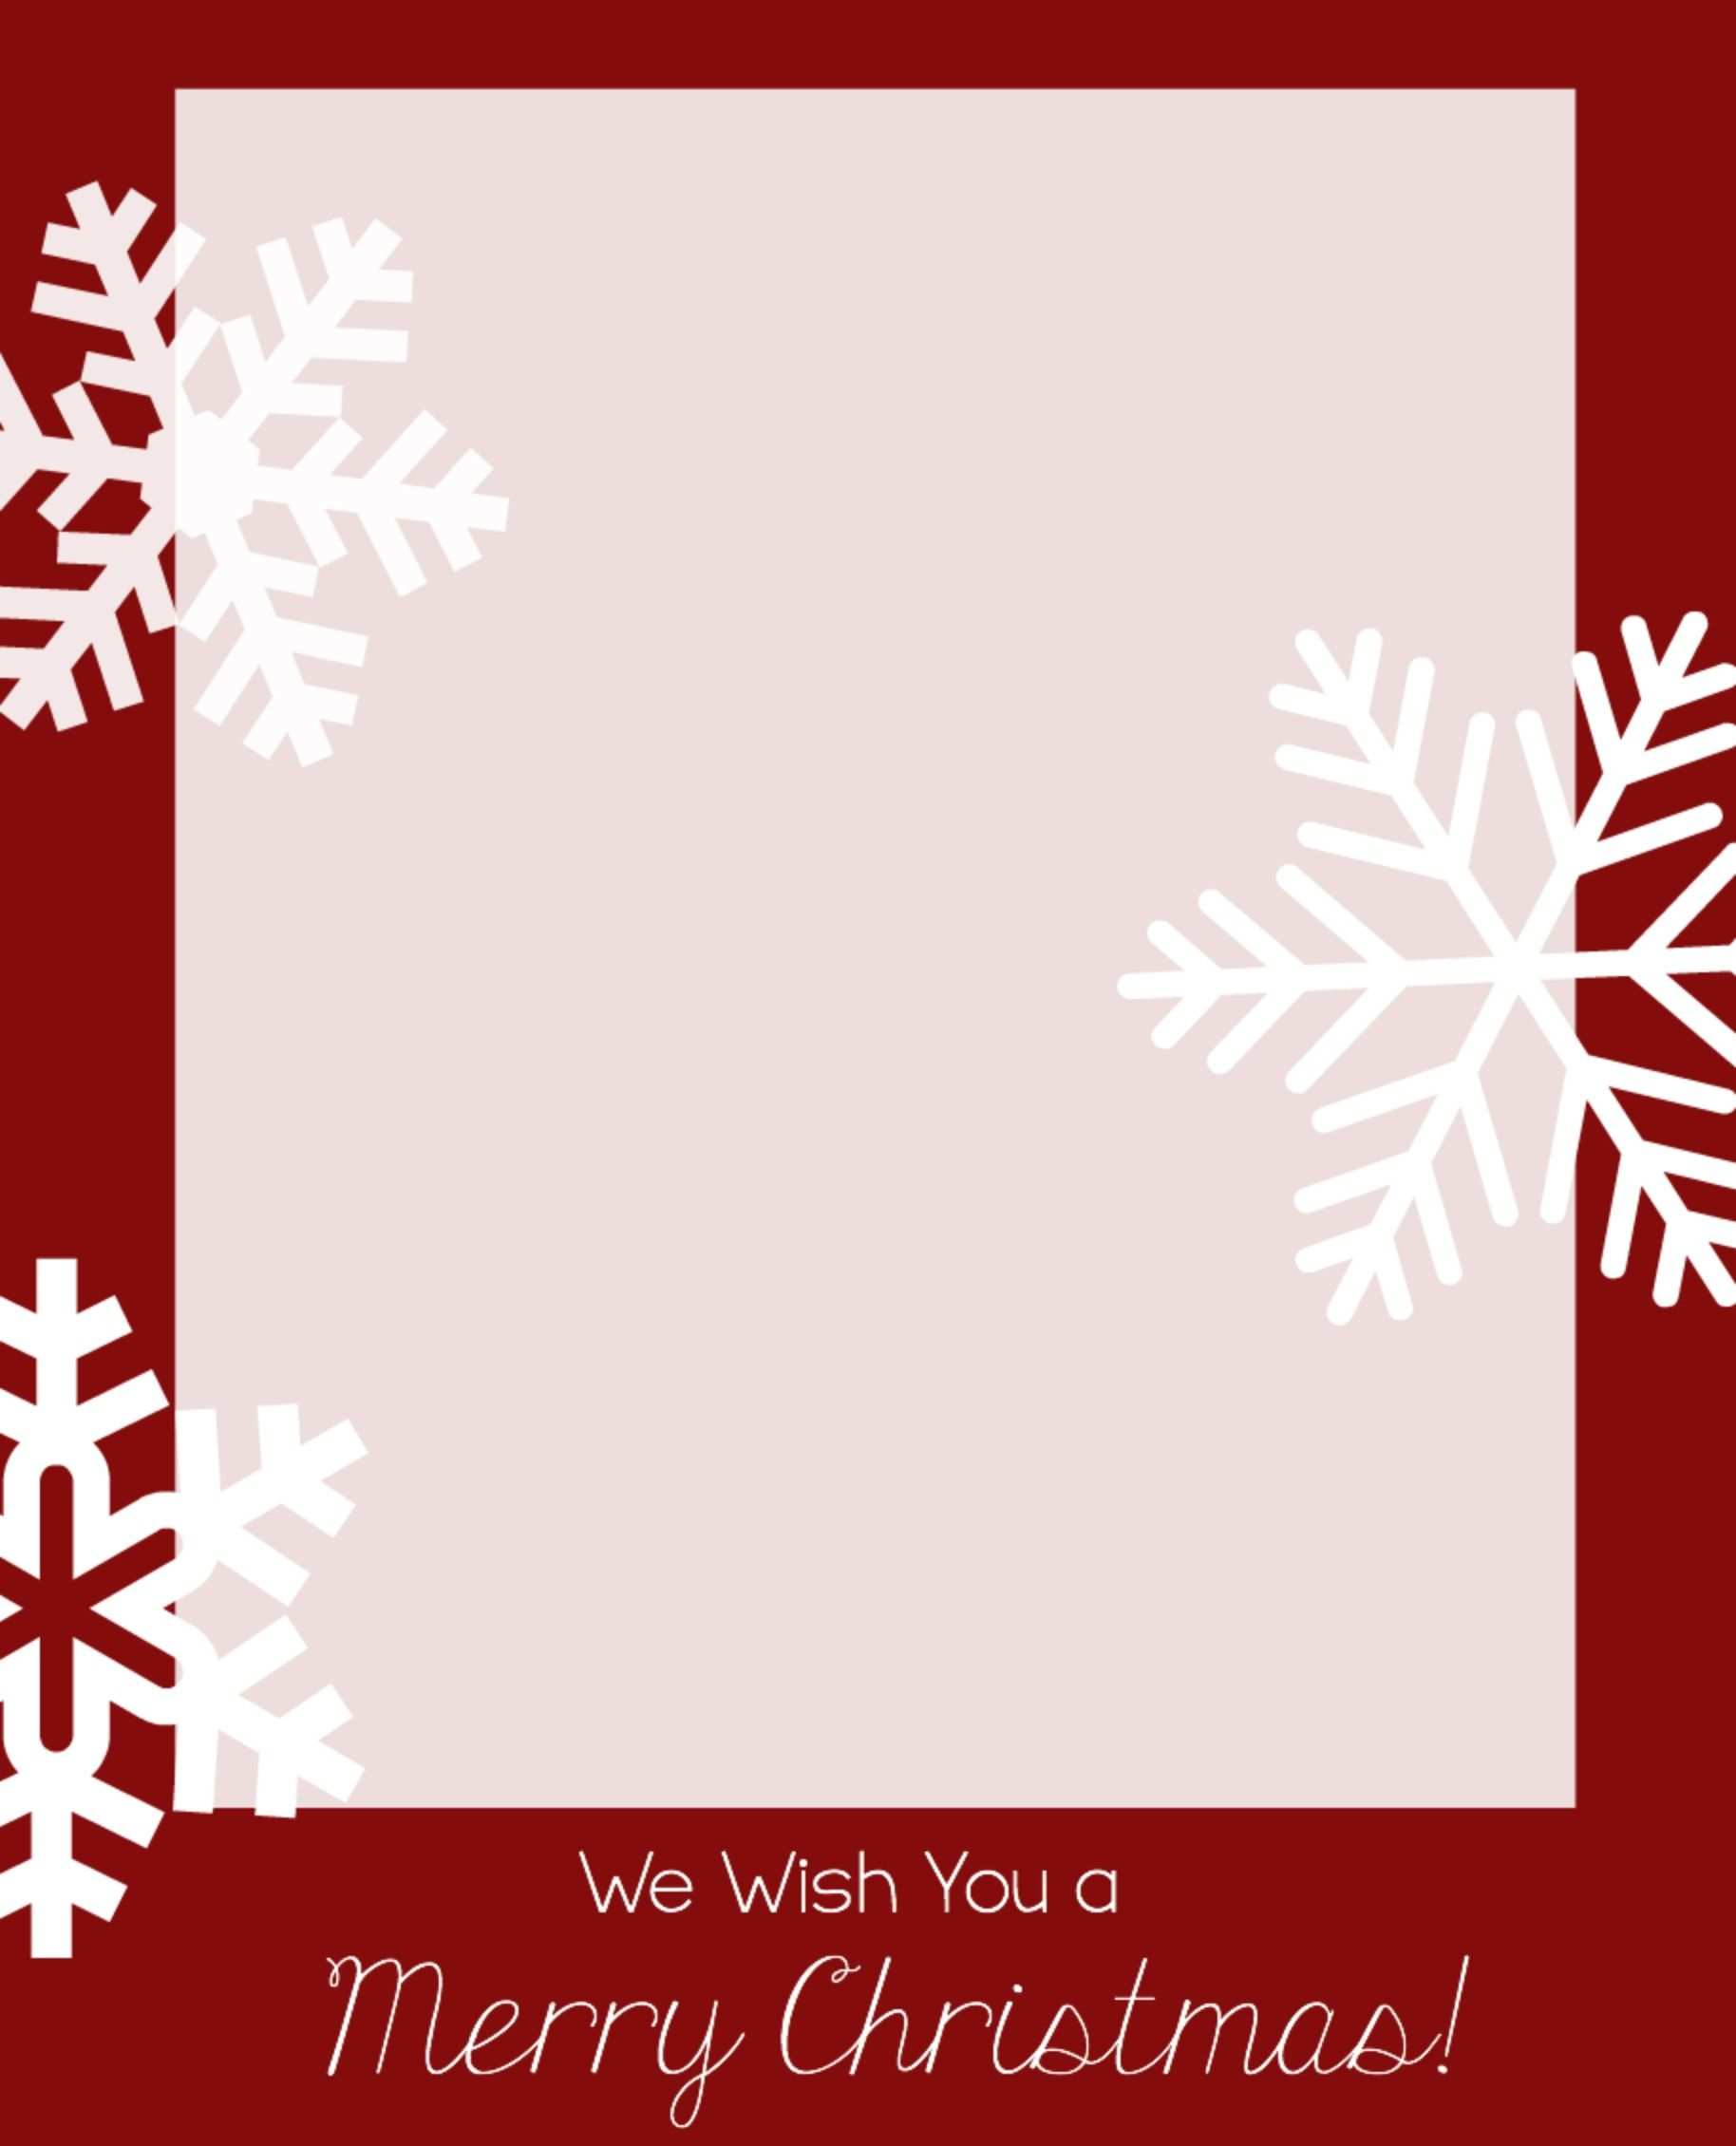 70 Free Holiday Christmas Card Templates Free Now with Holiday Christmas Card Templates Free